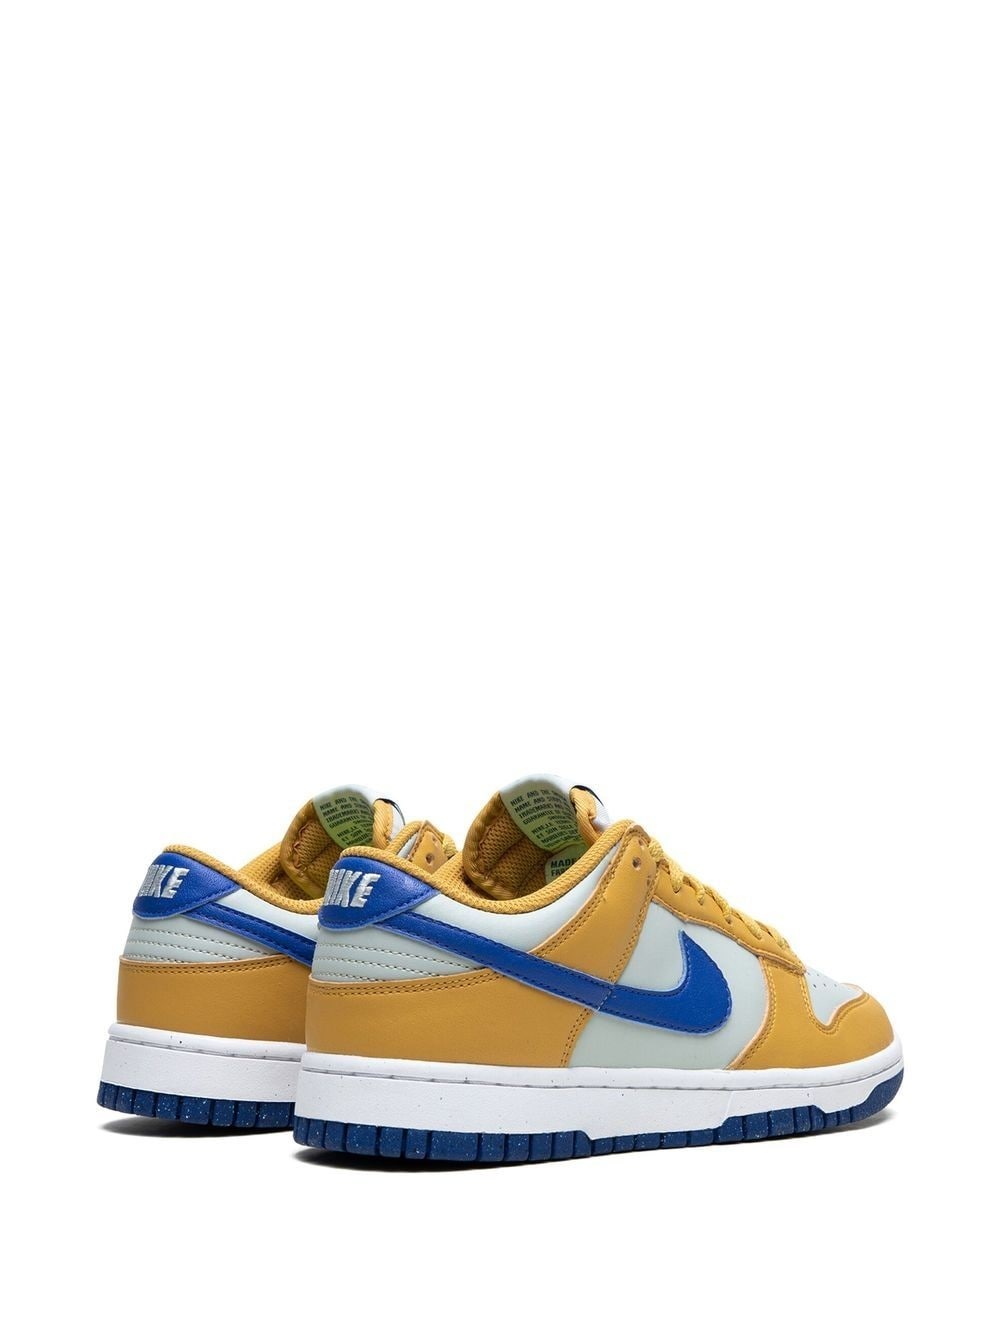 Dunk Low Next Nature "Wheat Gold Royal" sneakers - 3